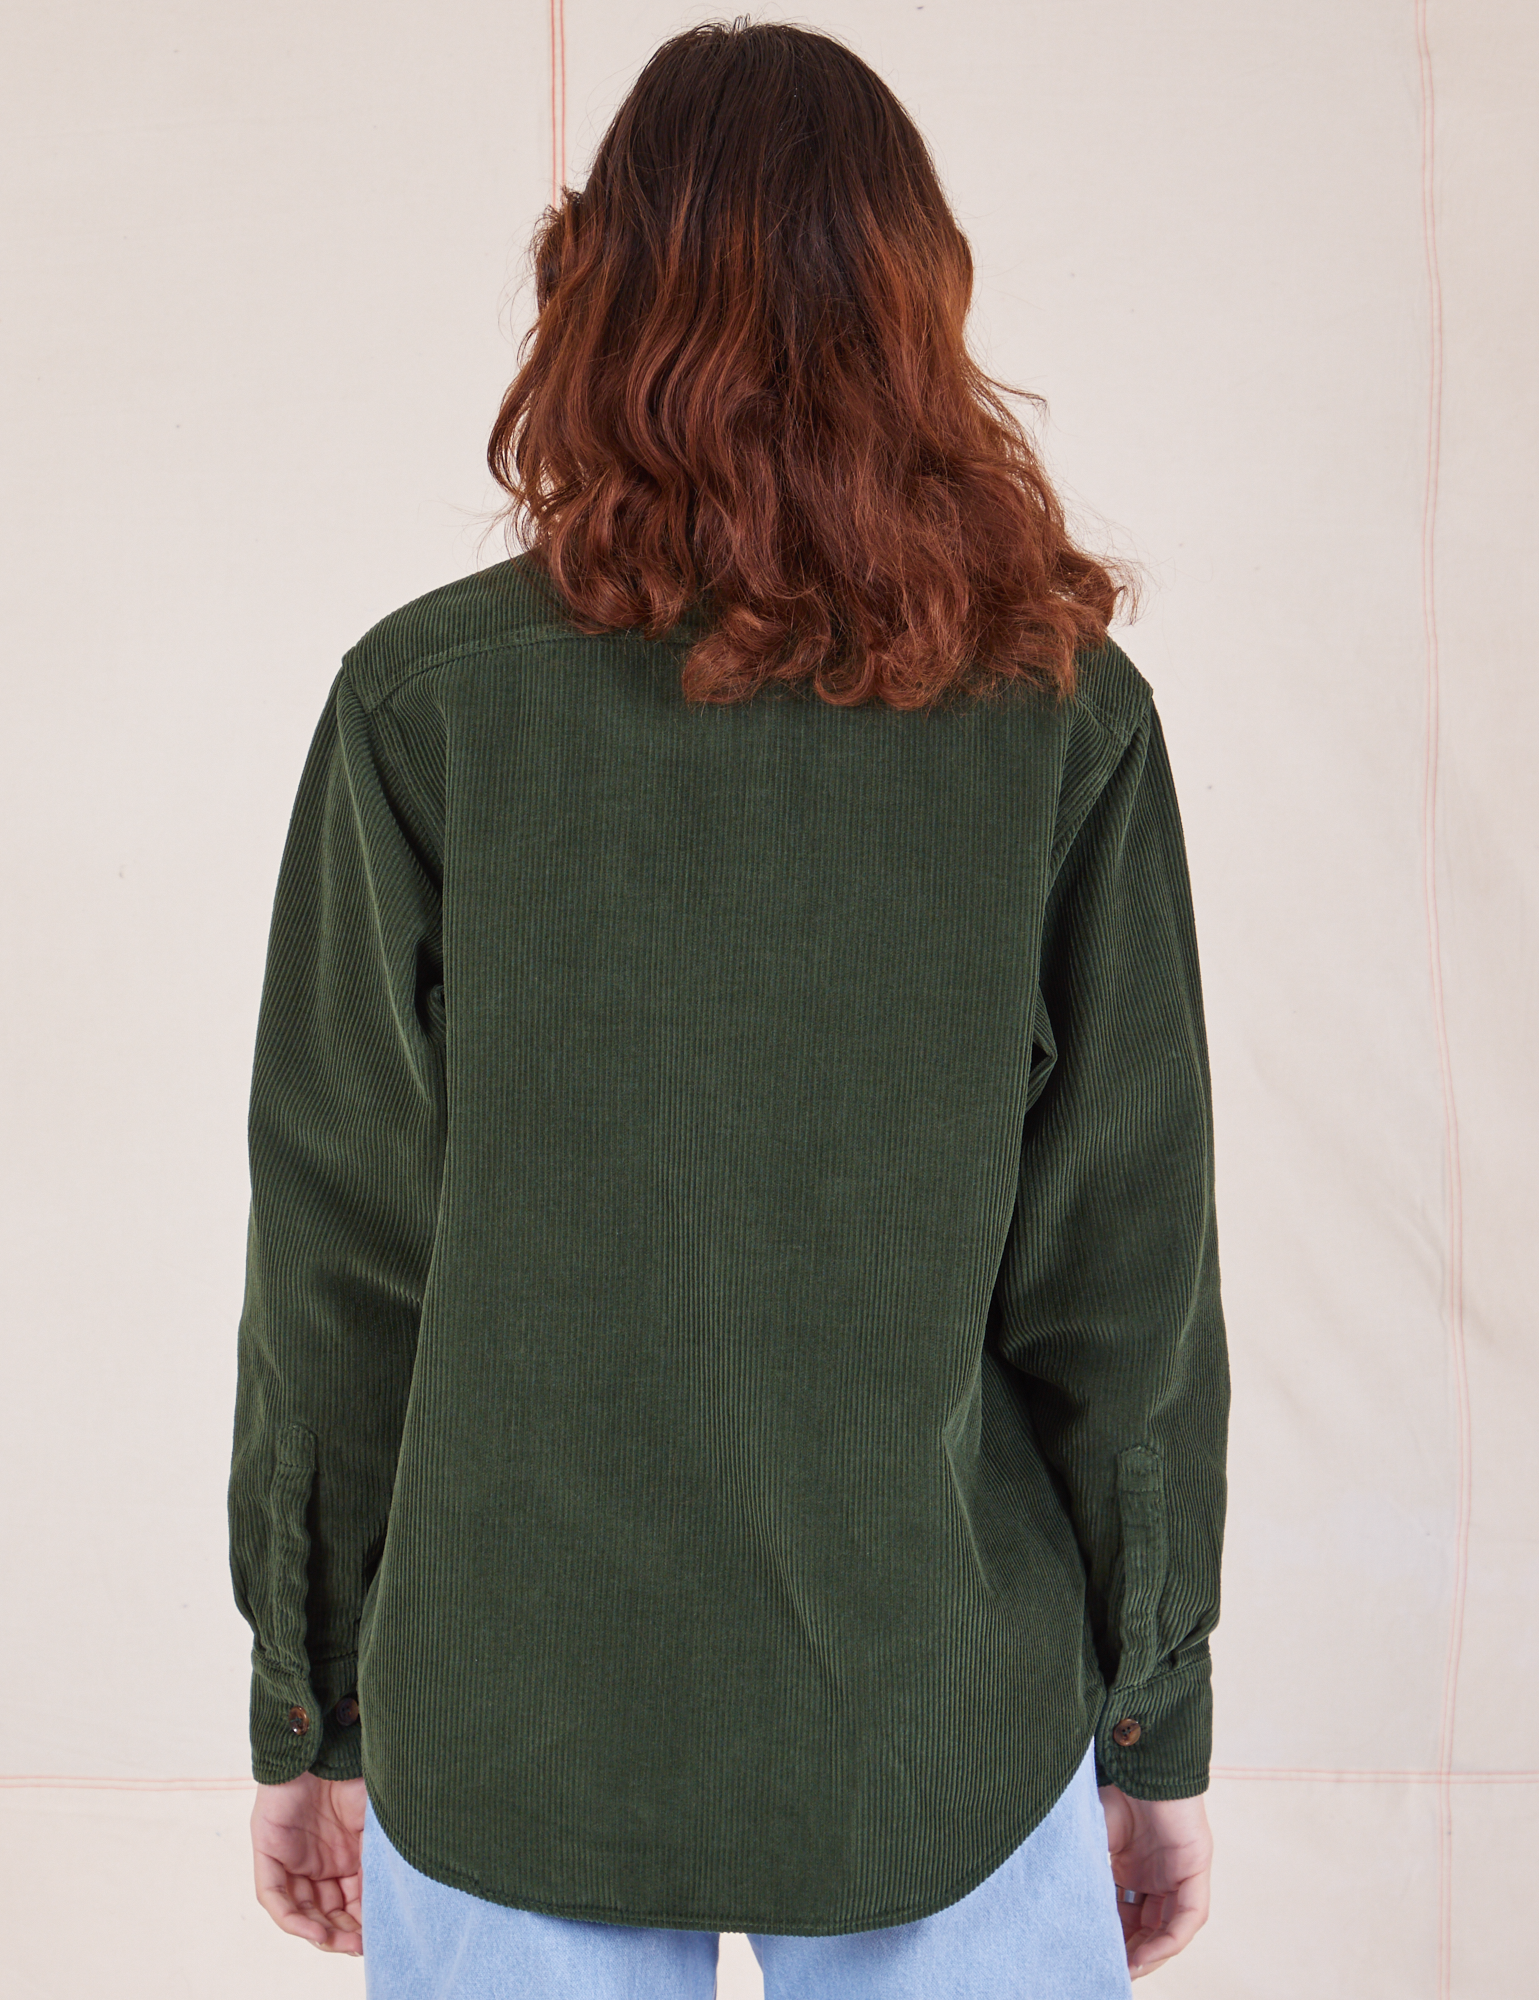 Corduroy Overshirt in Swamp Green back view on Alex